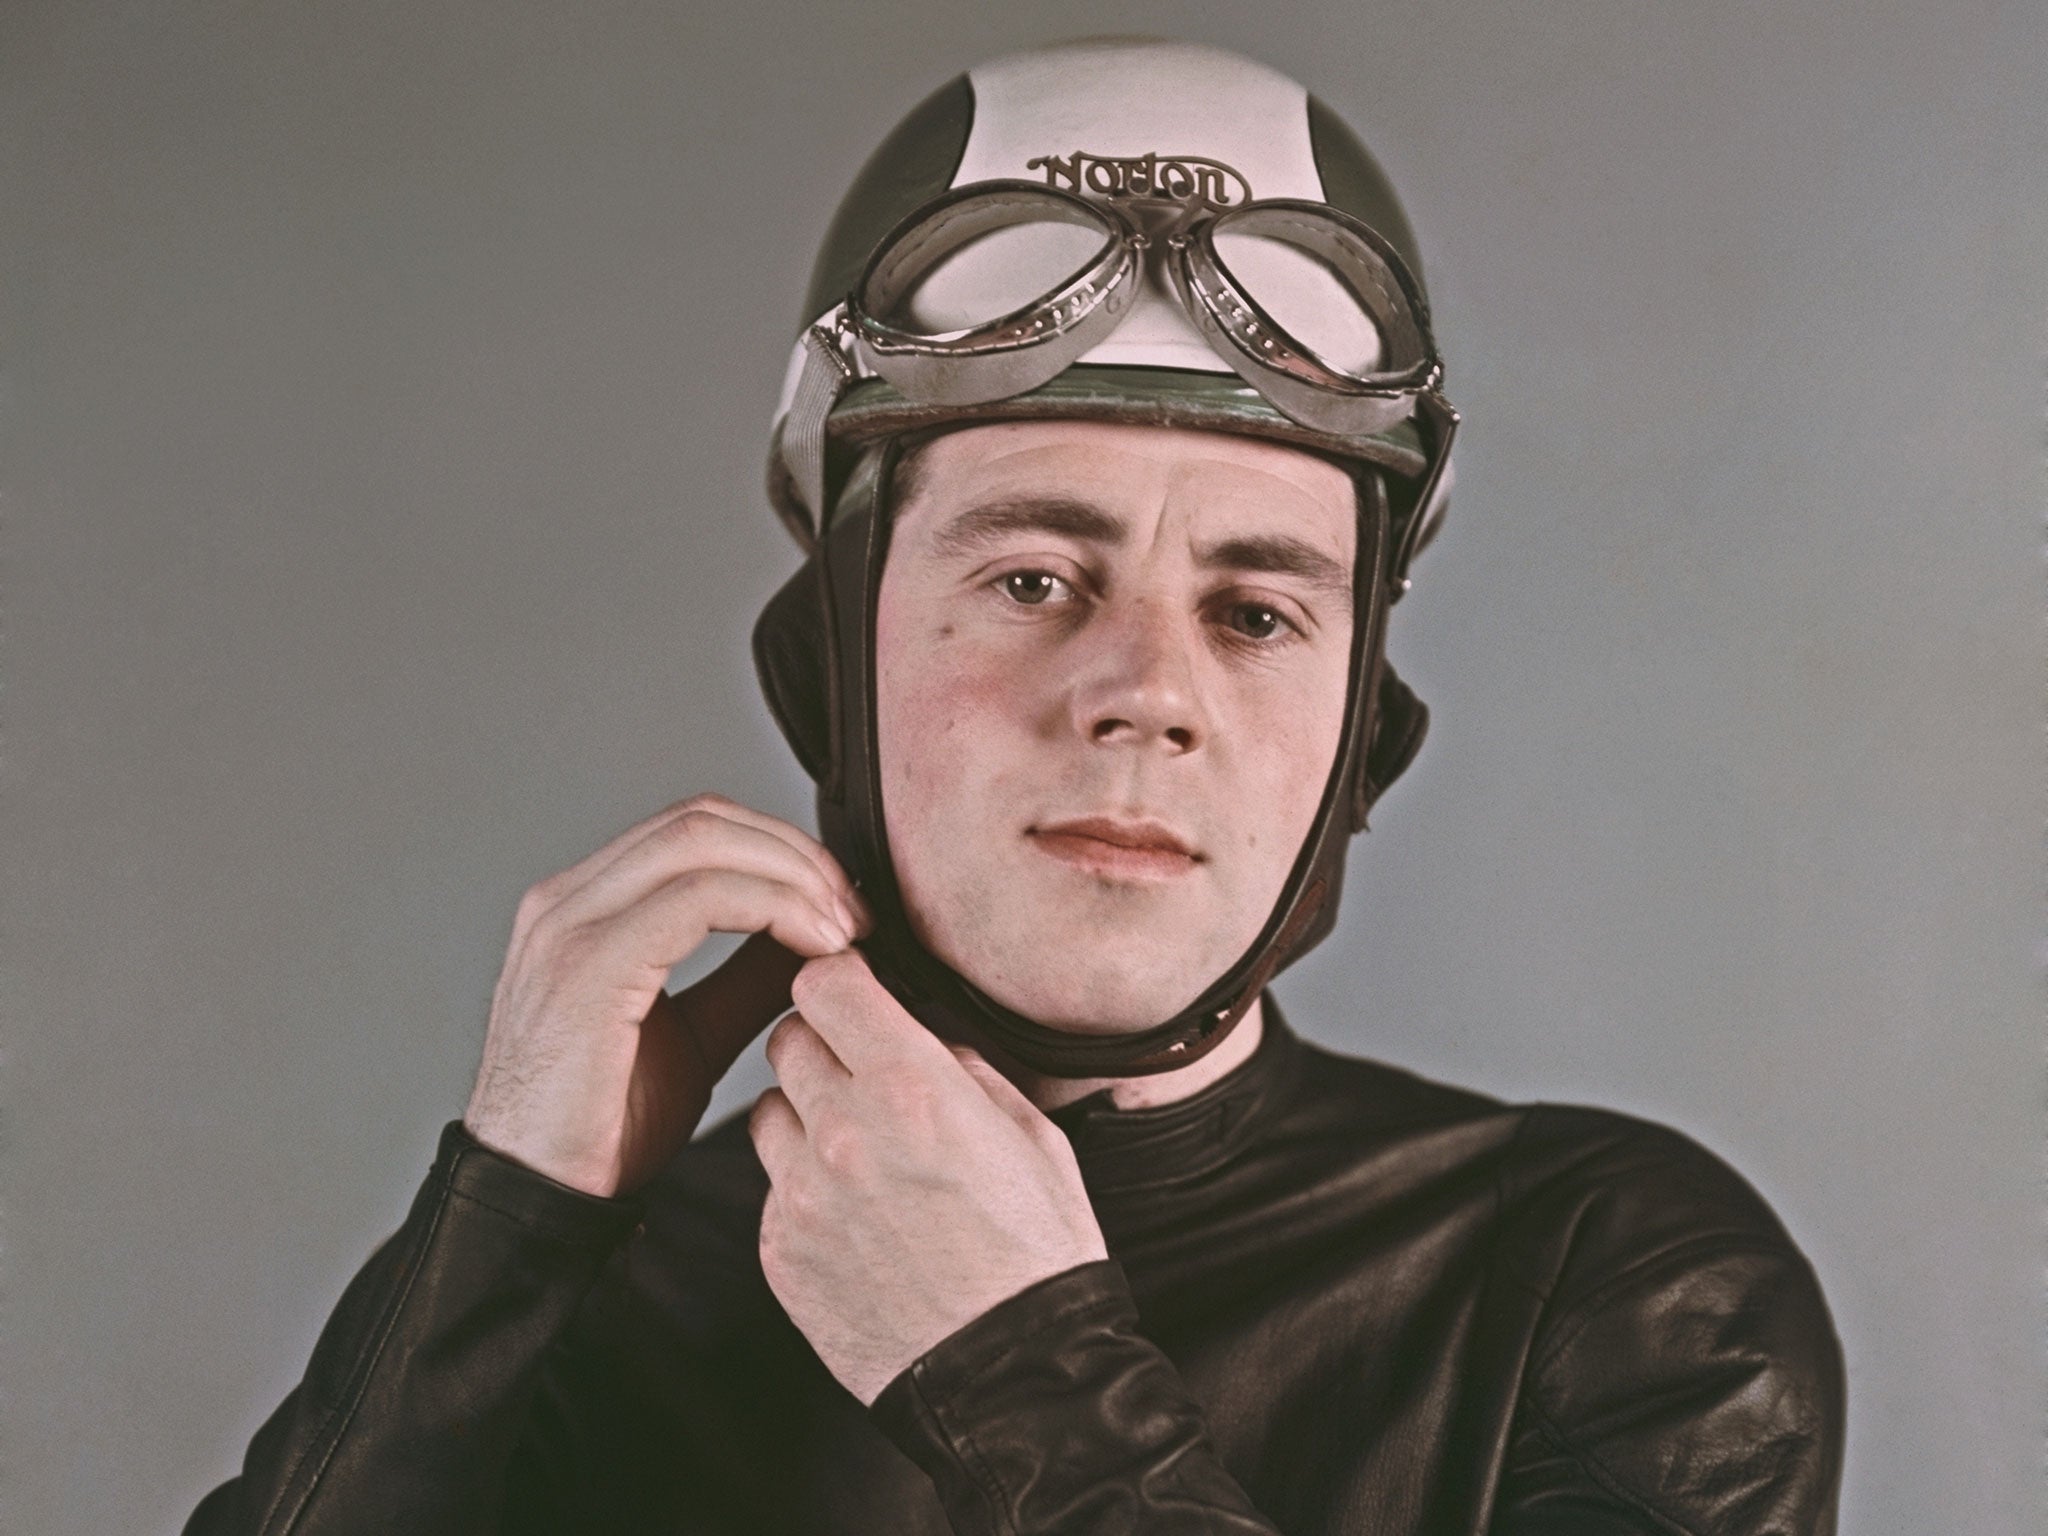 Duke in 1952: he transcended motorcycling to become a household name